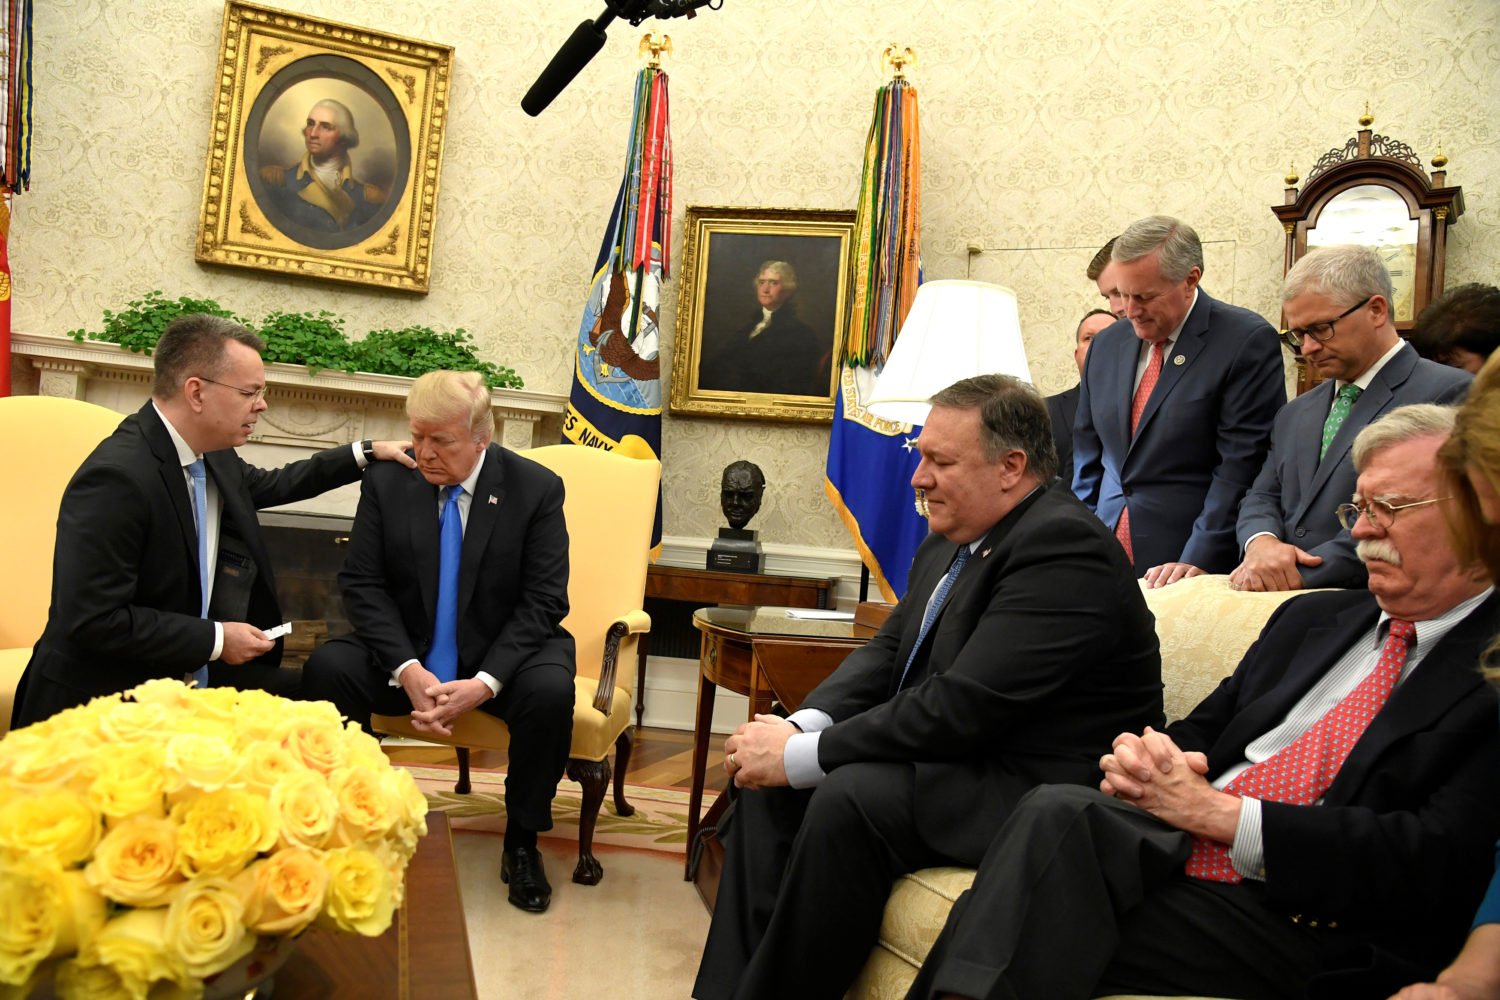 U.S. President Donald Trump closes his eyes in prayer along with Pastor Andrew Brunson, after his release from two years of Turkish detention, along with Secretary of State Mike Pompeo and National Security Advisor John Bolton, in the Oval Office of the White House, Washington, U.S., October 13, 2018. REUTERS/Mike Theiler